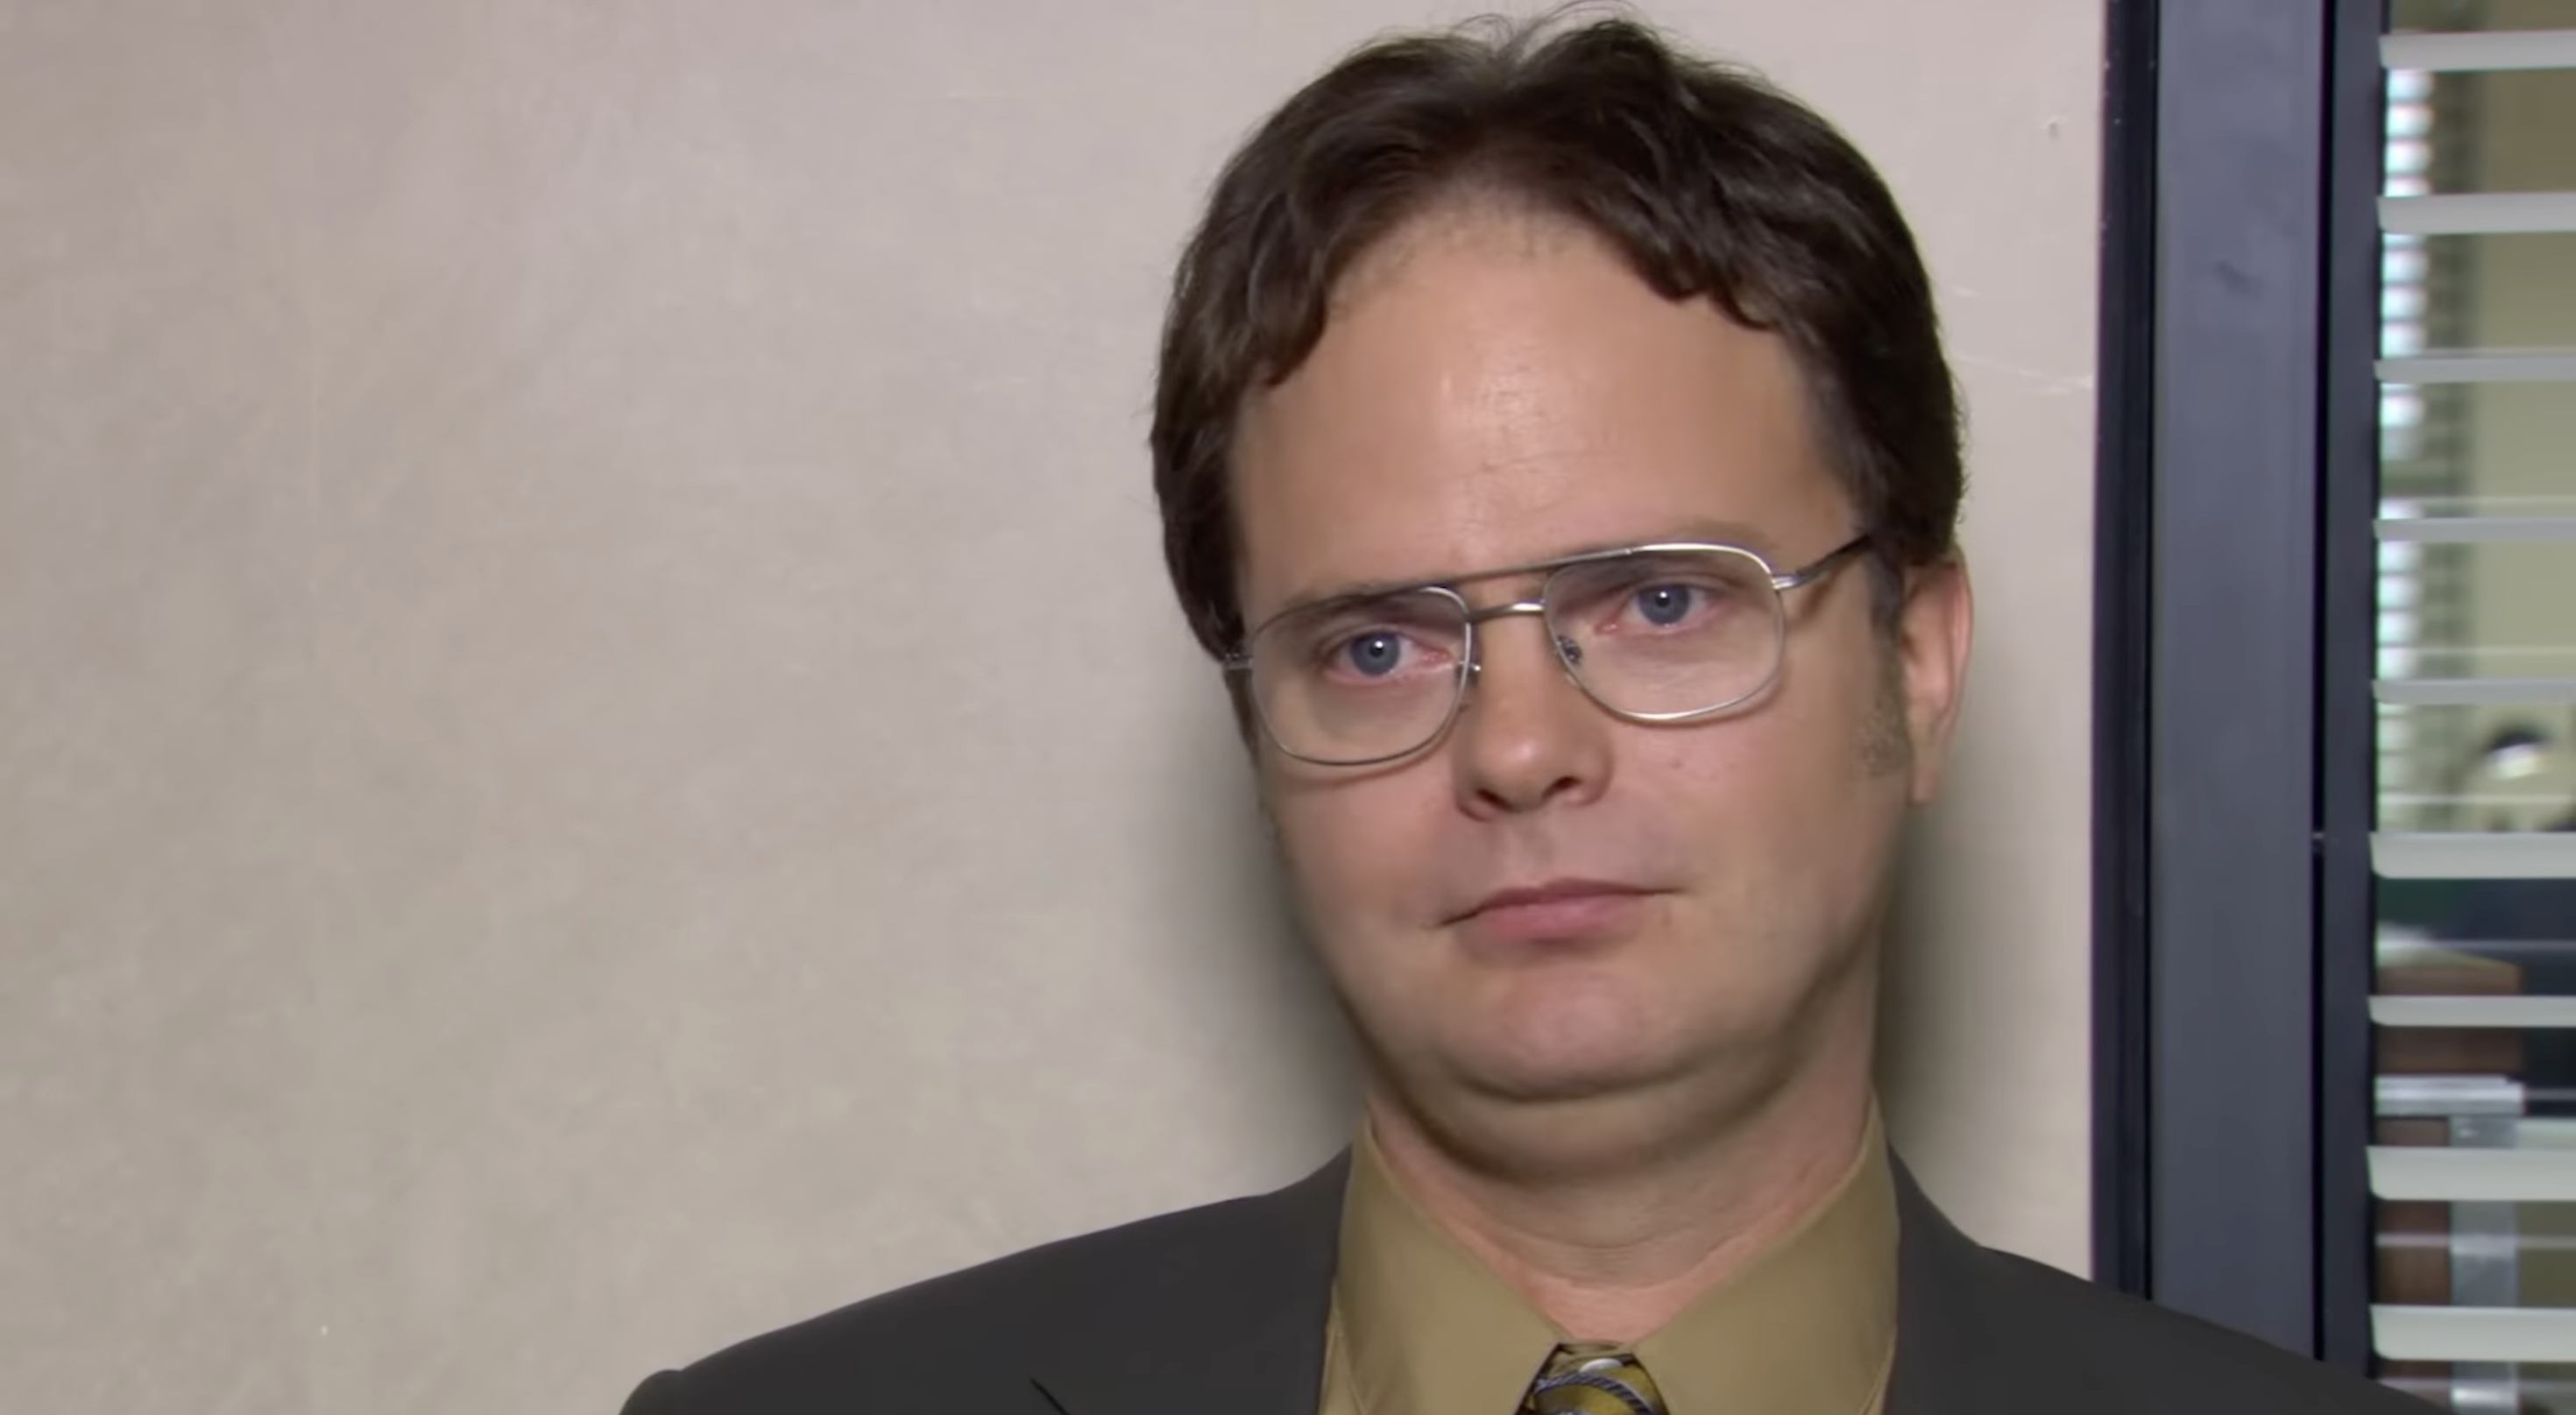 Dwight Schrute looking unamused at the camera